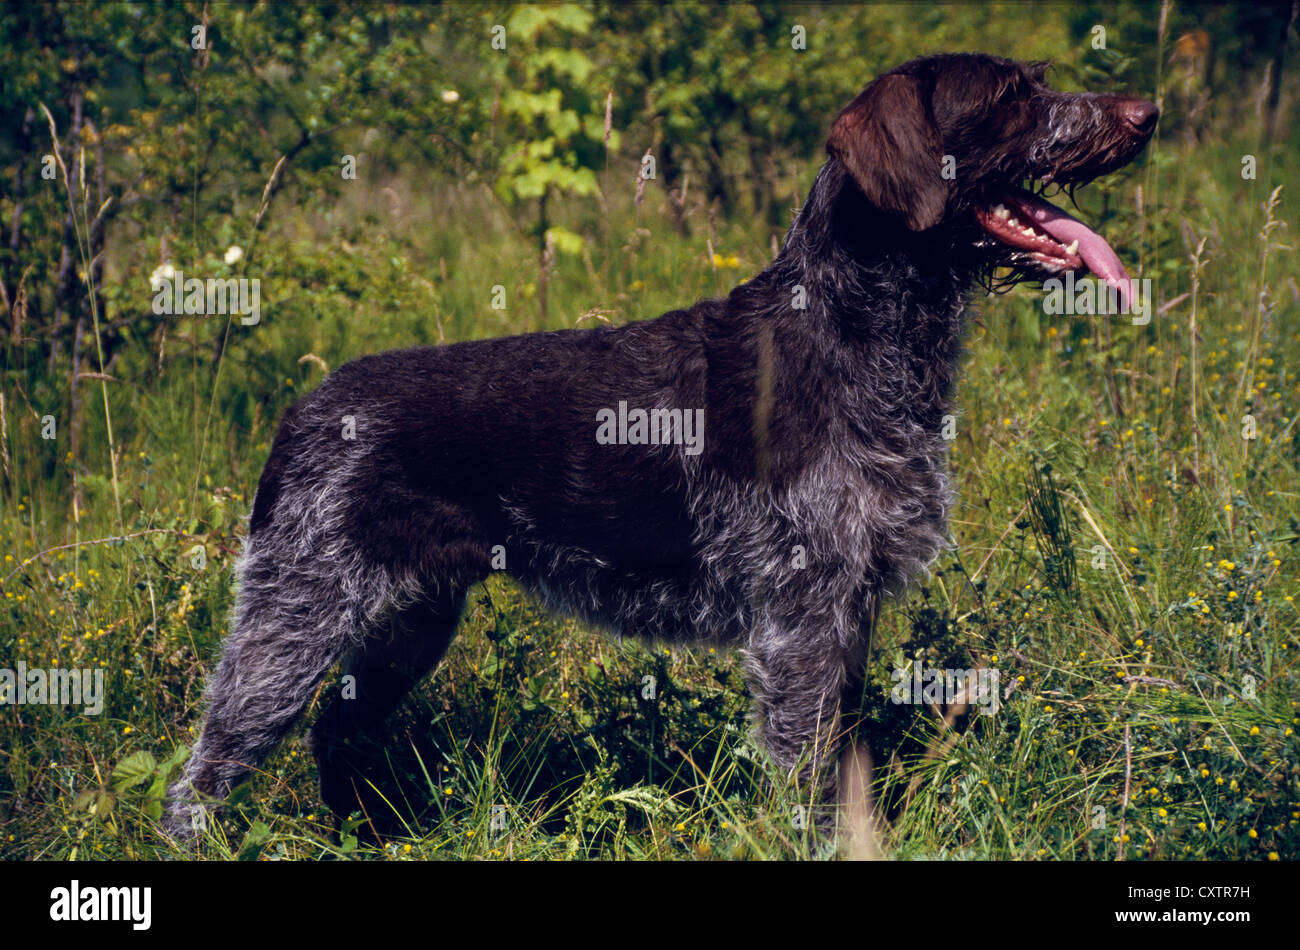 SIDE VIEW OF GERMAN WIRE-HAIRED POINTER IN FIELD Stock Photo